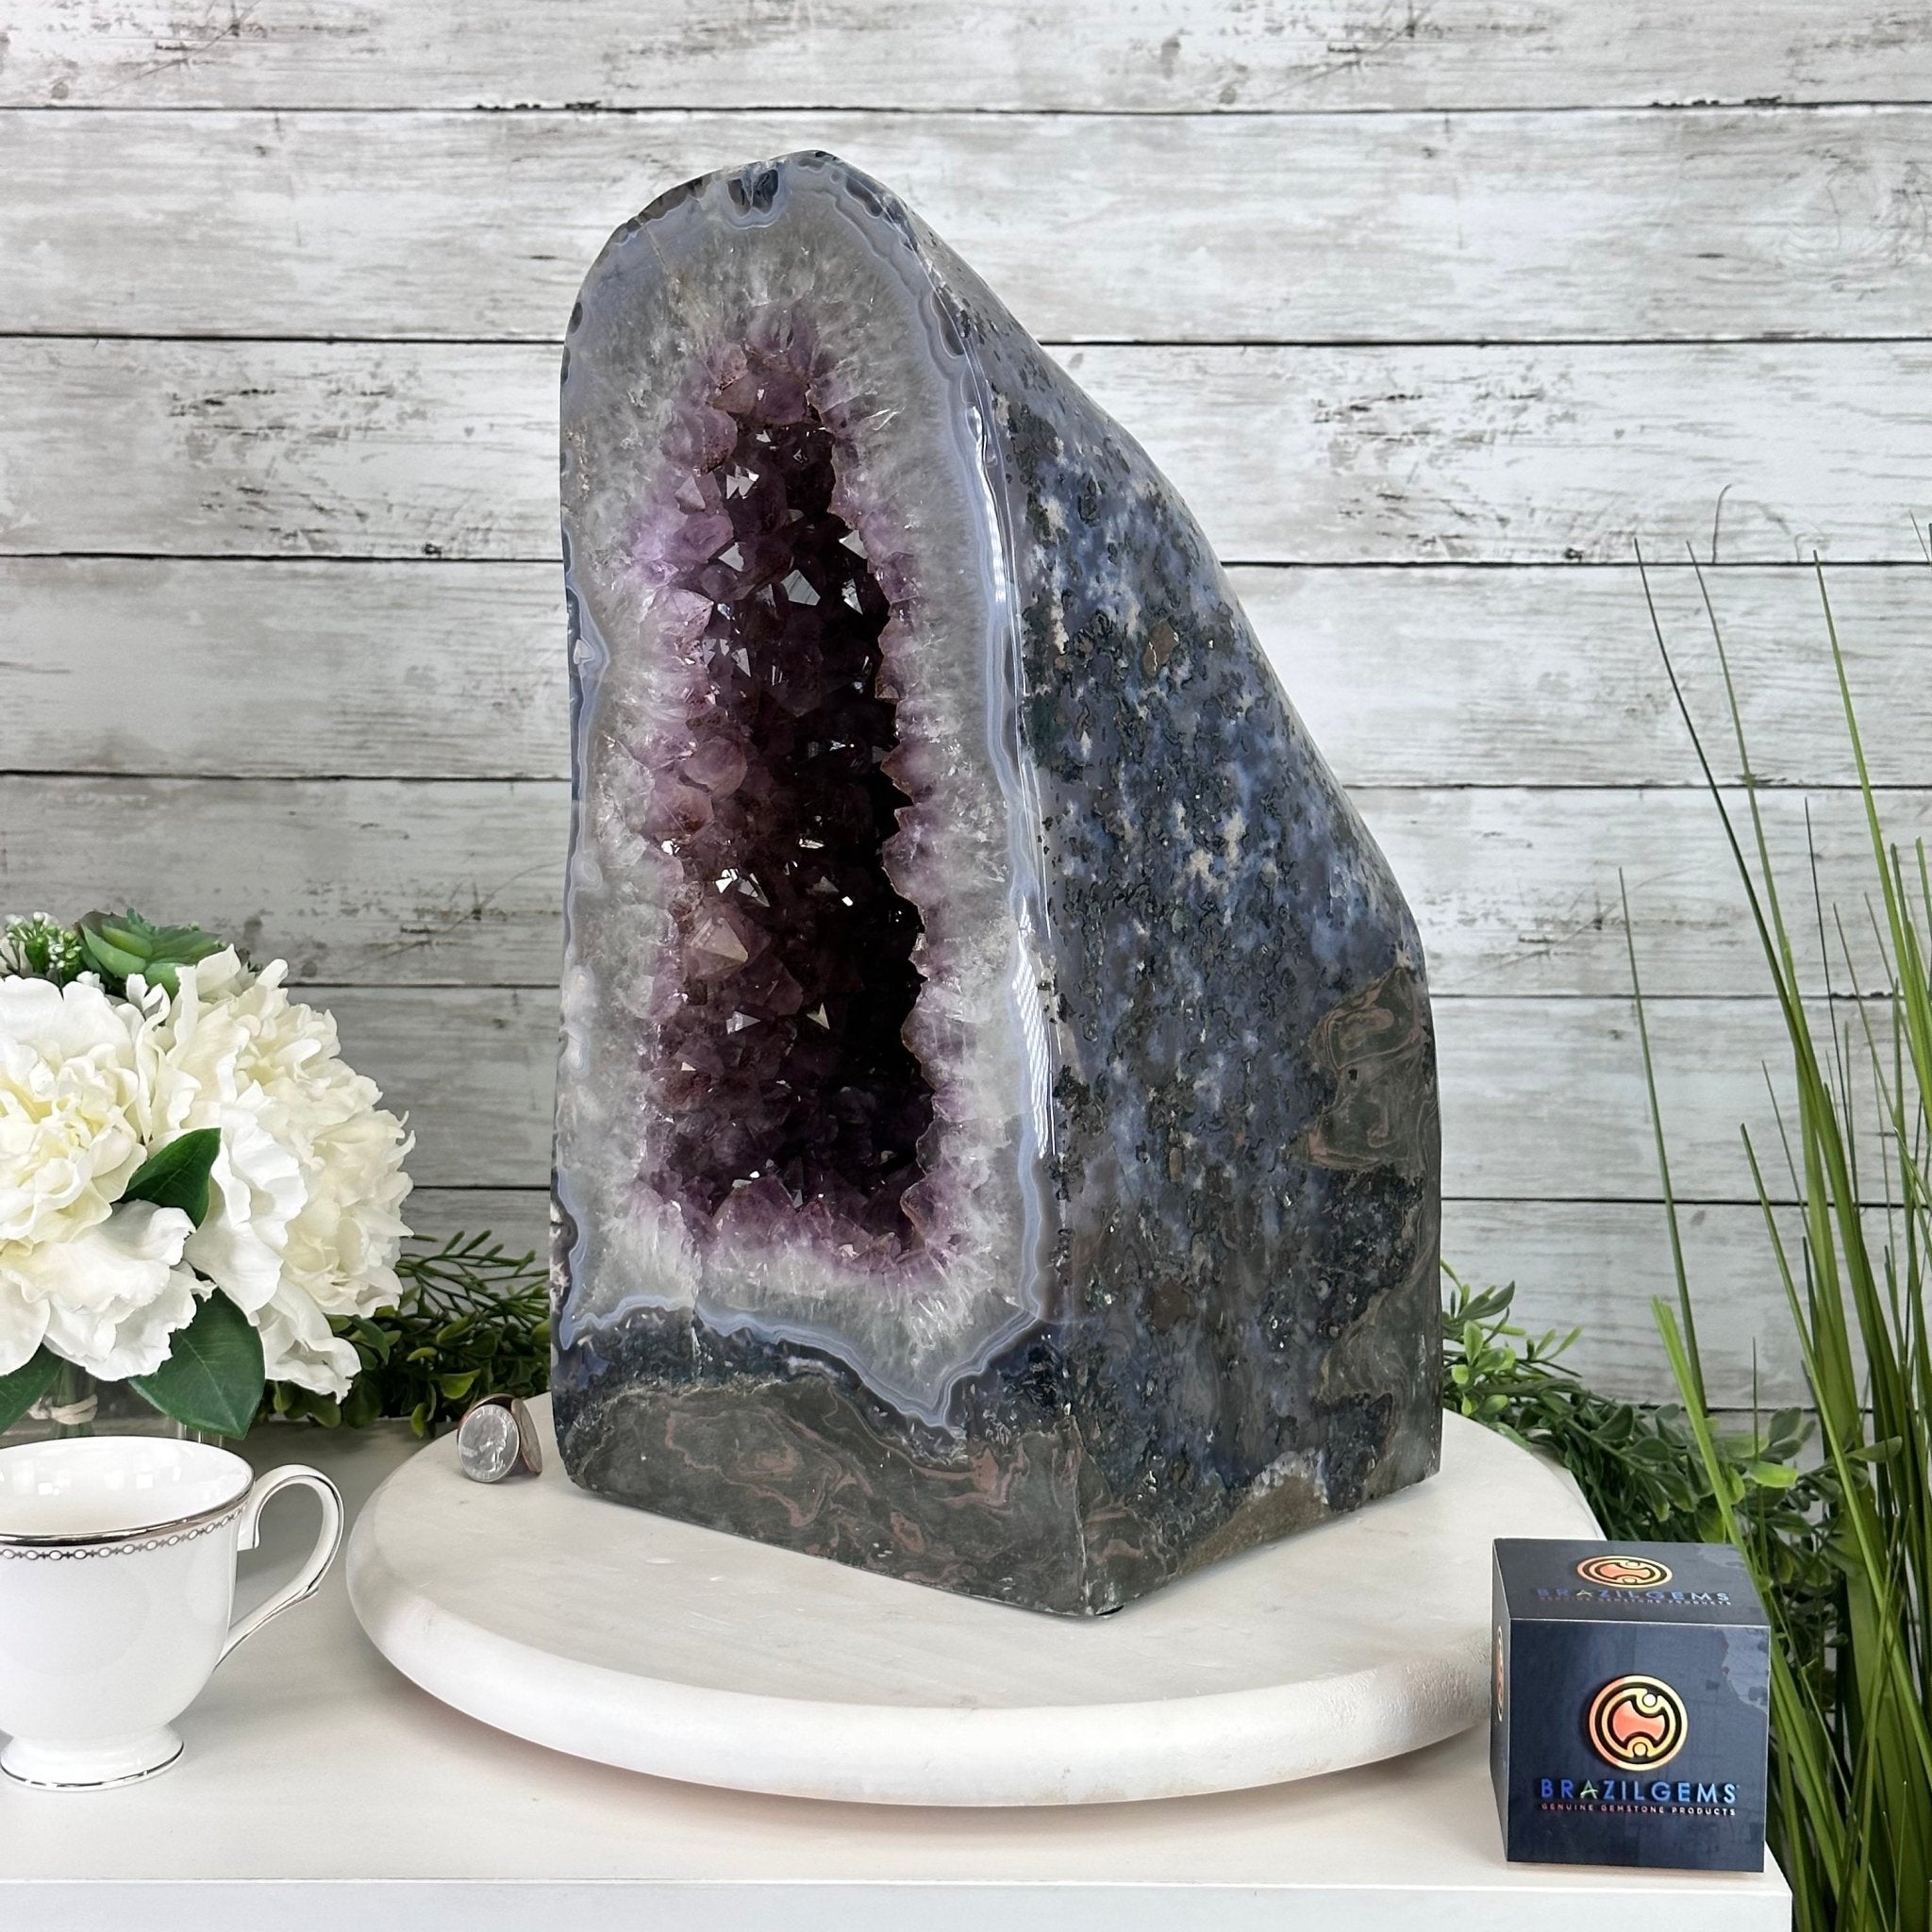 Extra Plus Quality Polished Brazilian Amethyst Cathedral, 46.6 lbs & 15.75" tall Model #5602-0193 by Brazil Gems - Brazil GemsBrazil GemsExtra Plus Quality Polished Brazilian Amethyst Cathedral, 46.6 lbs & 15.75" tall Model #5602-0193 by Brazil GemsPolished Cathedrals5602-0193